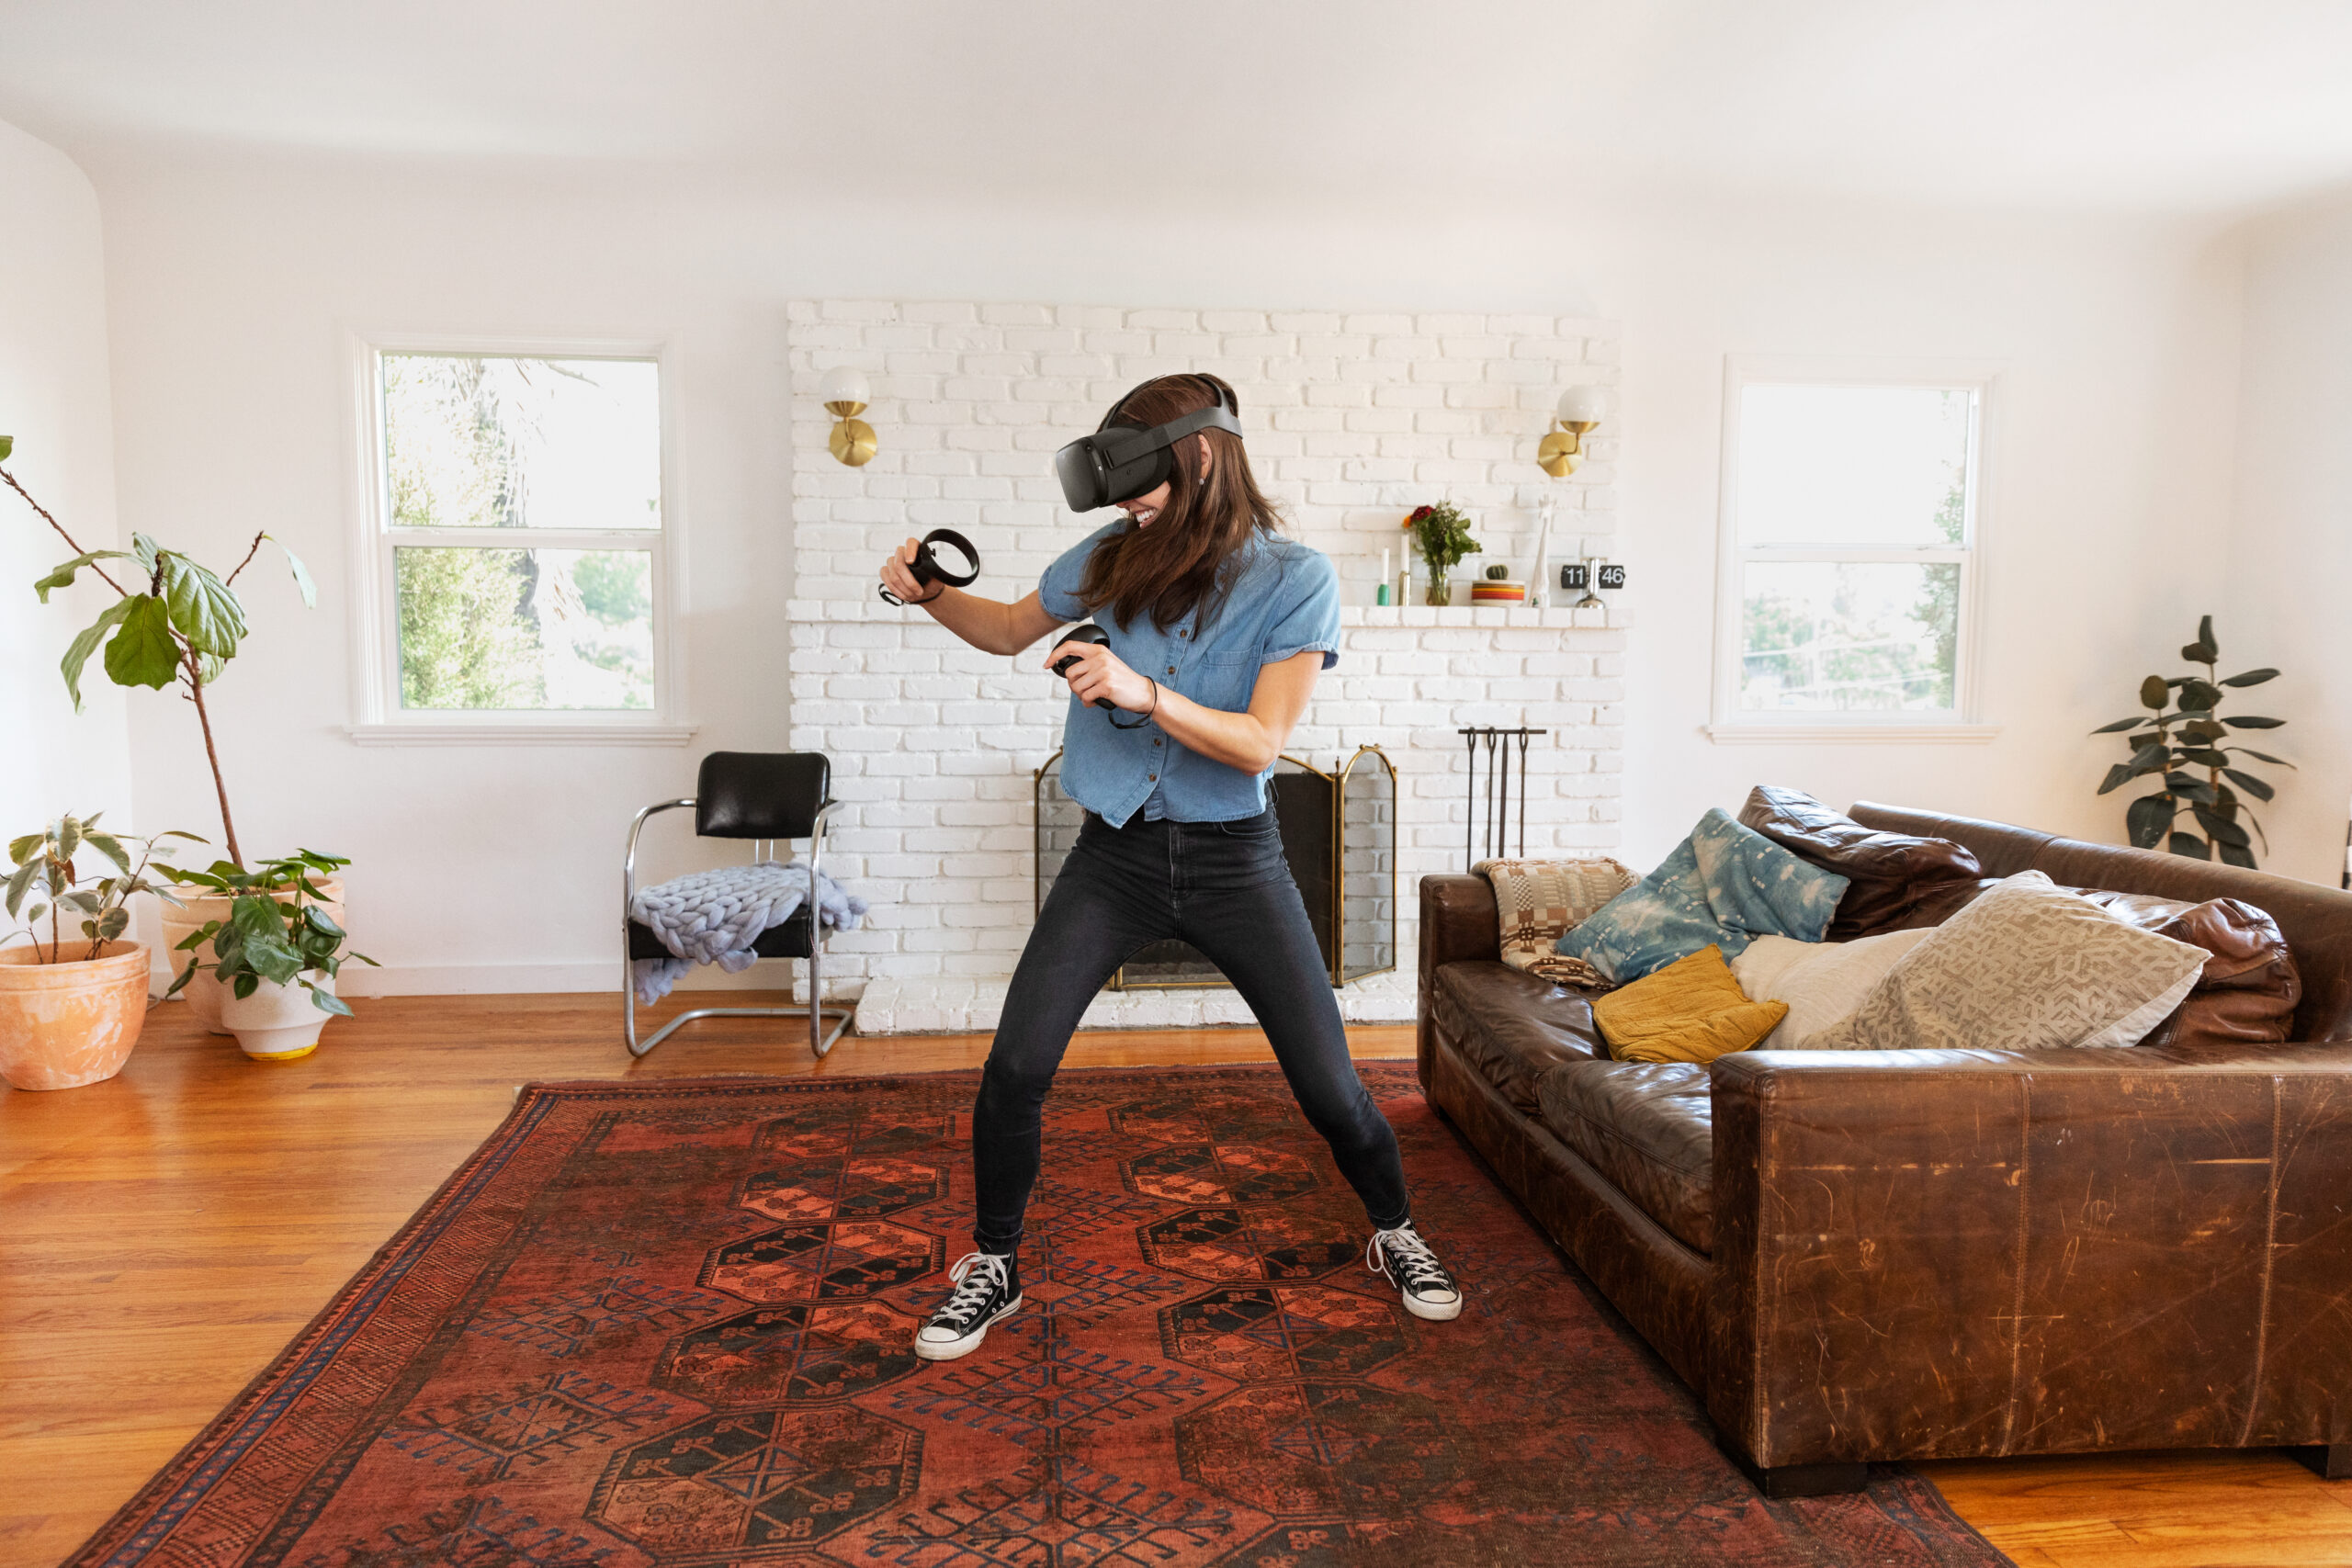 Oculus Quest brings your real-world motion into VR. Here’s what that’s like.